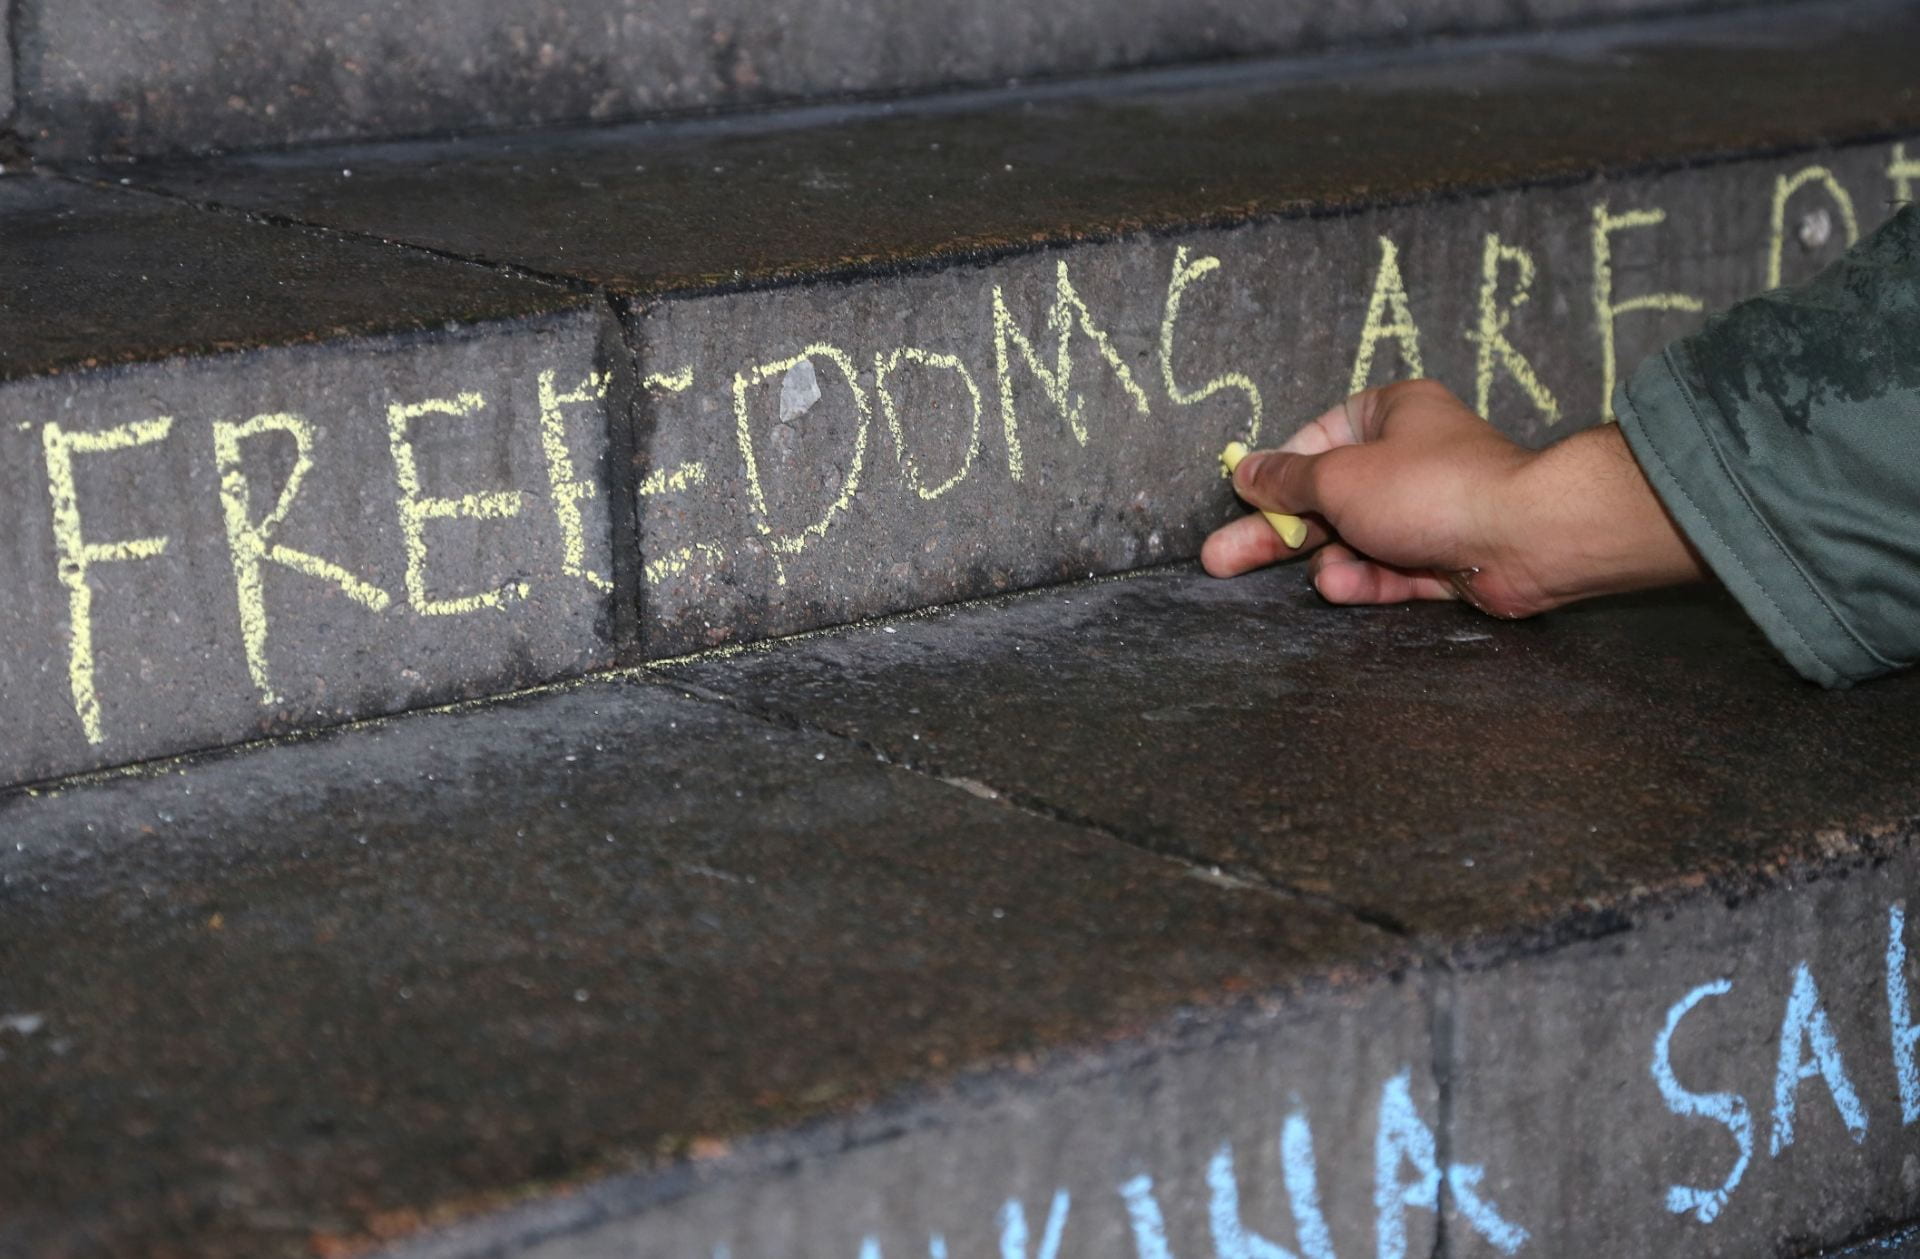 Image shows a person writing the word freedoms using chalk on a concrete staircase.